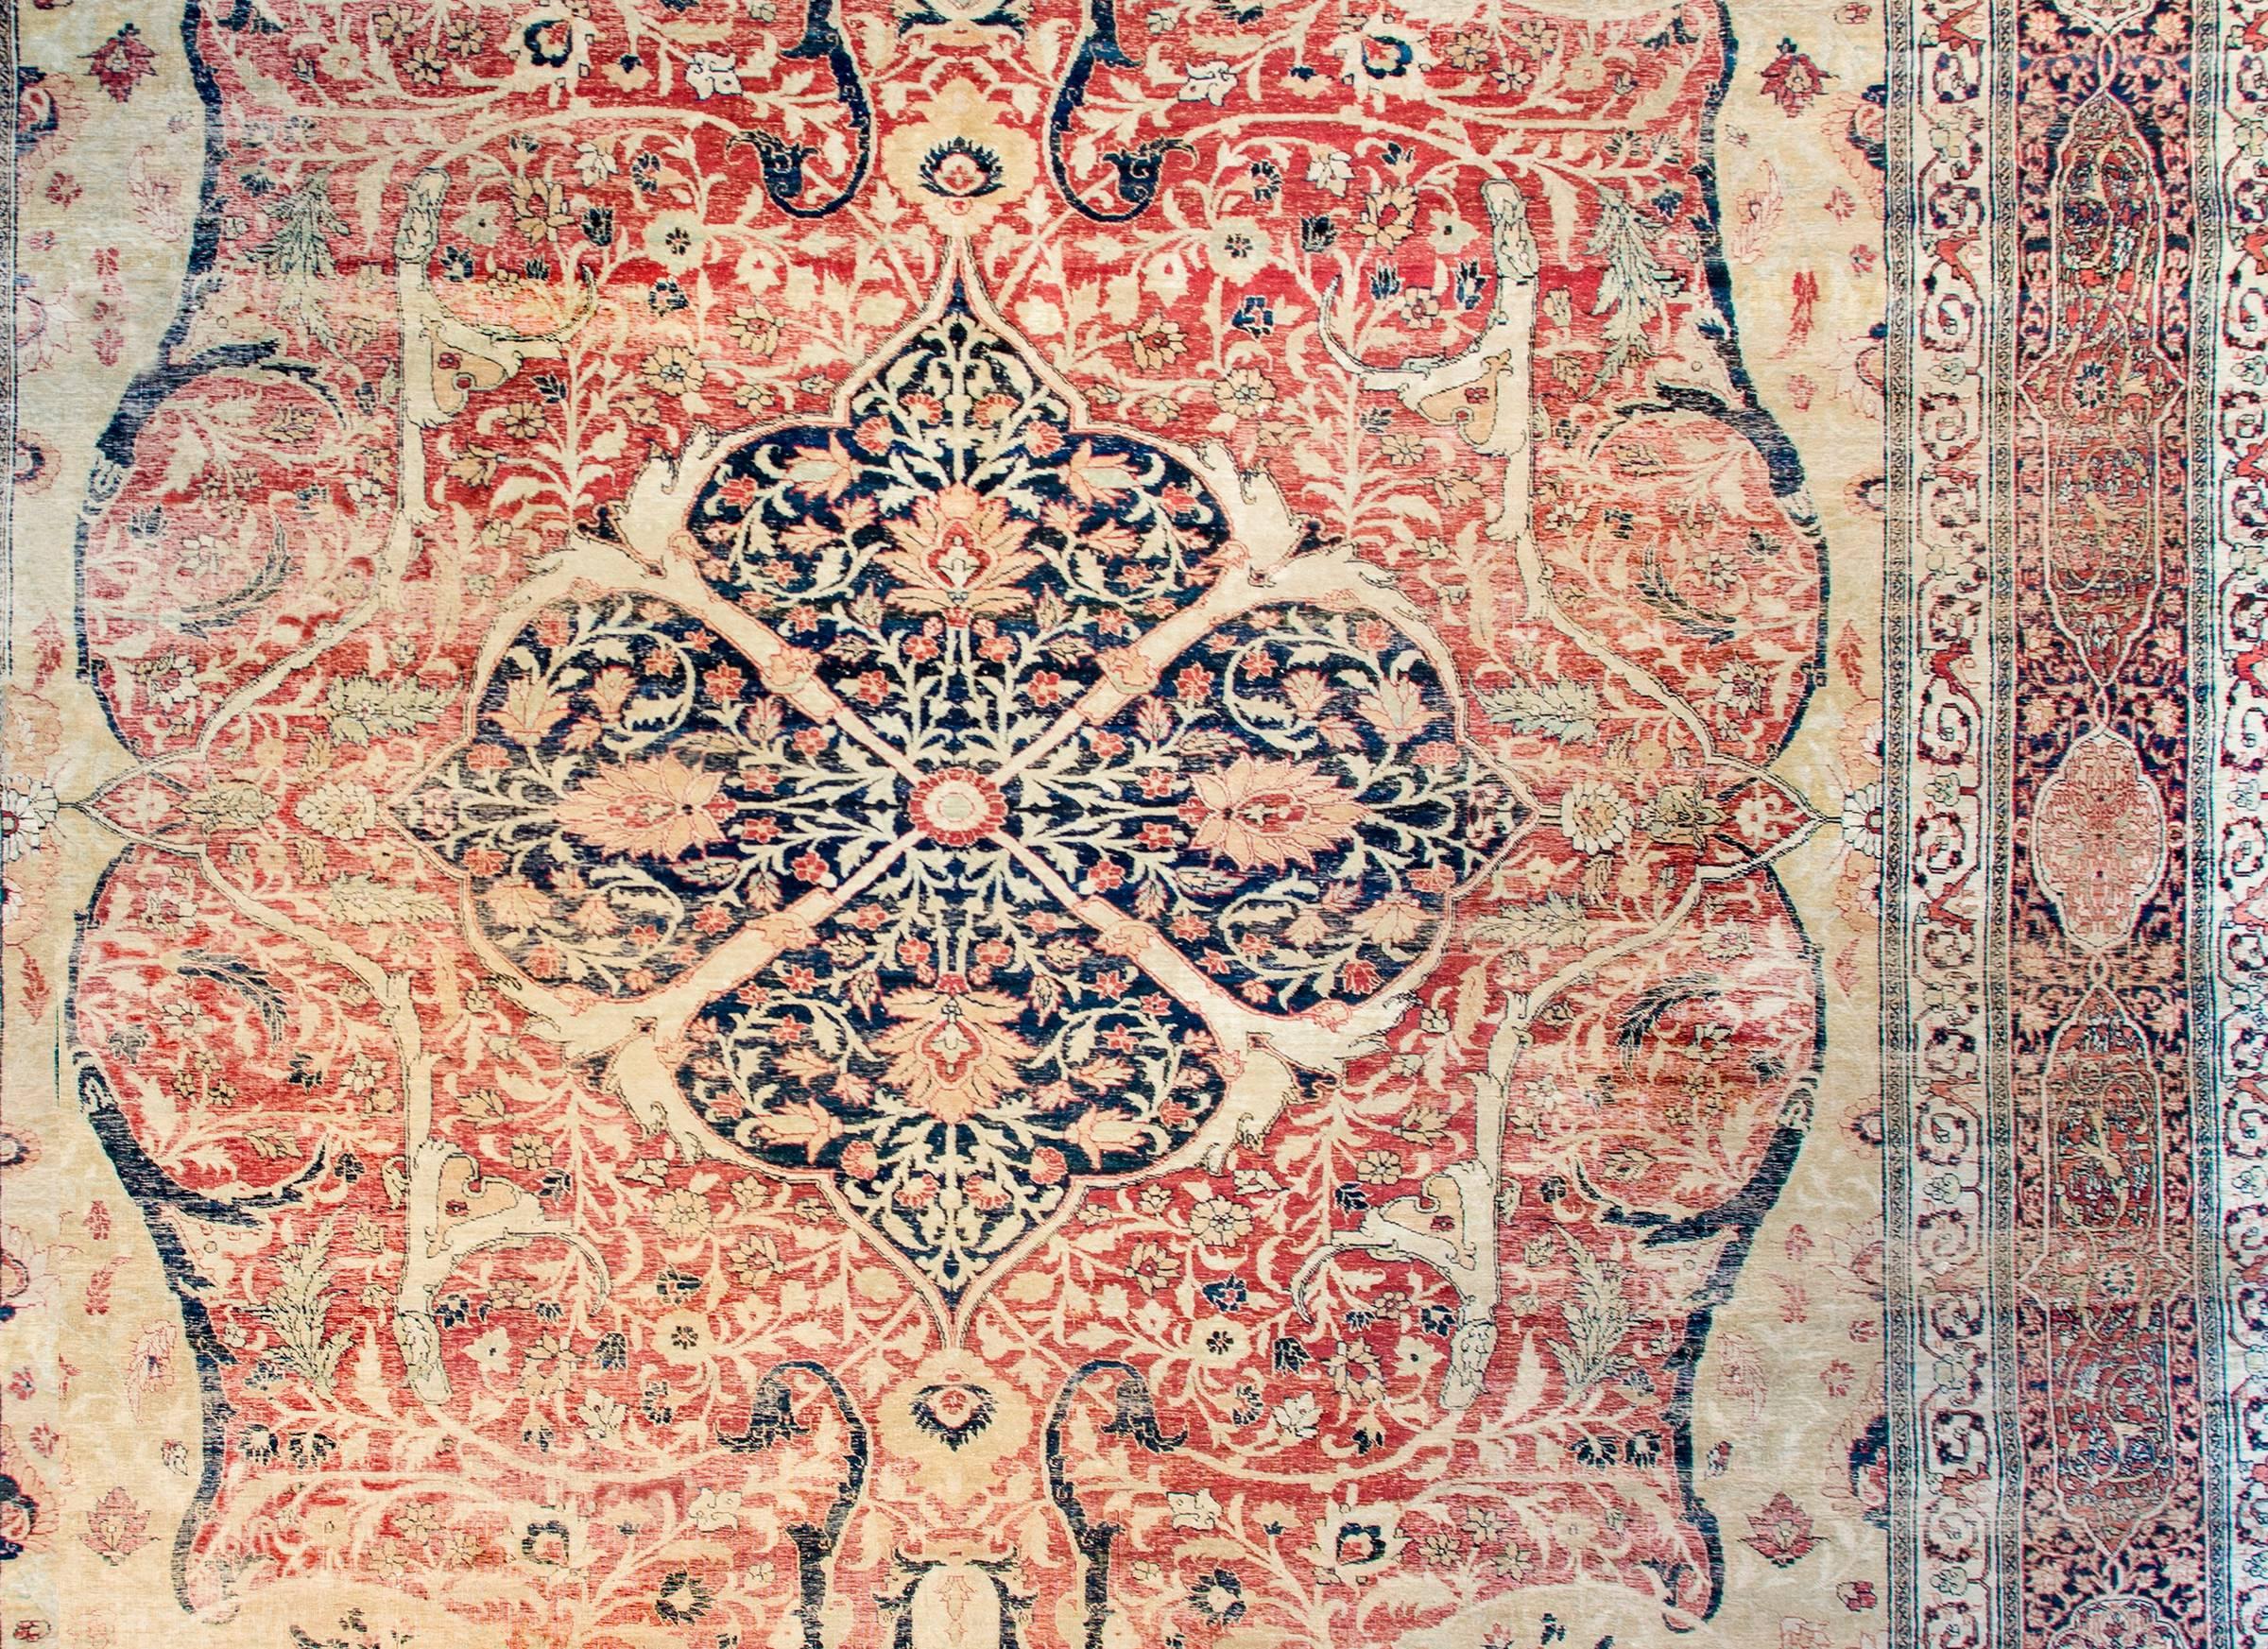 A truly masterful mid-19th century Persian Haji Jalili Tabriz rug with an amazing design. The central medallion is skillfully rendered with scrolling vines with myriad multicolored flowers. The medallion rests on an incredible field of similar